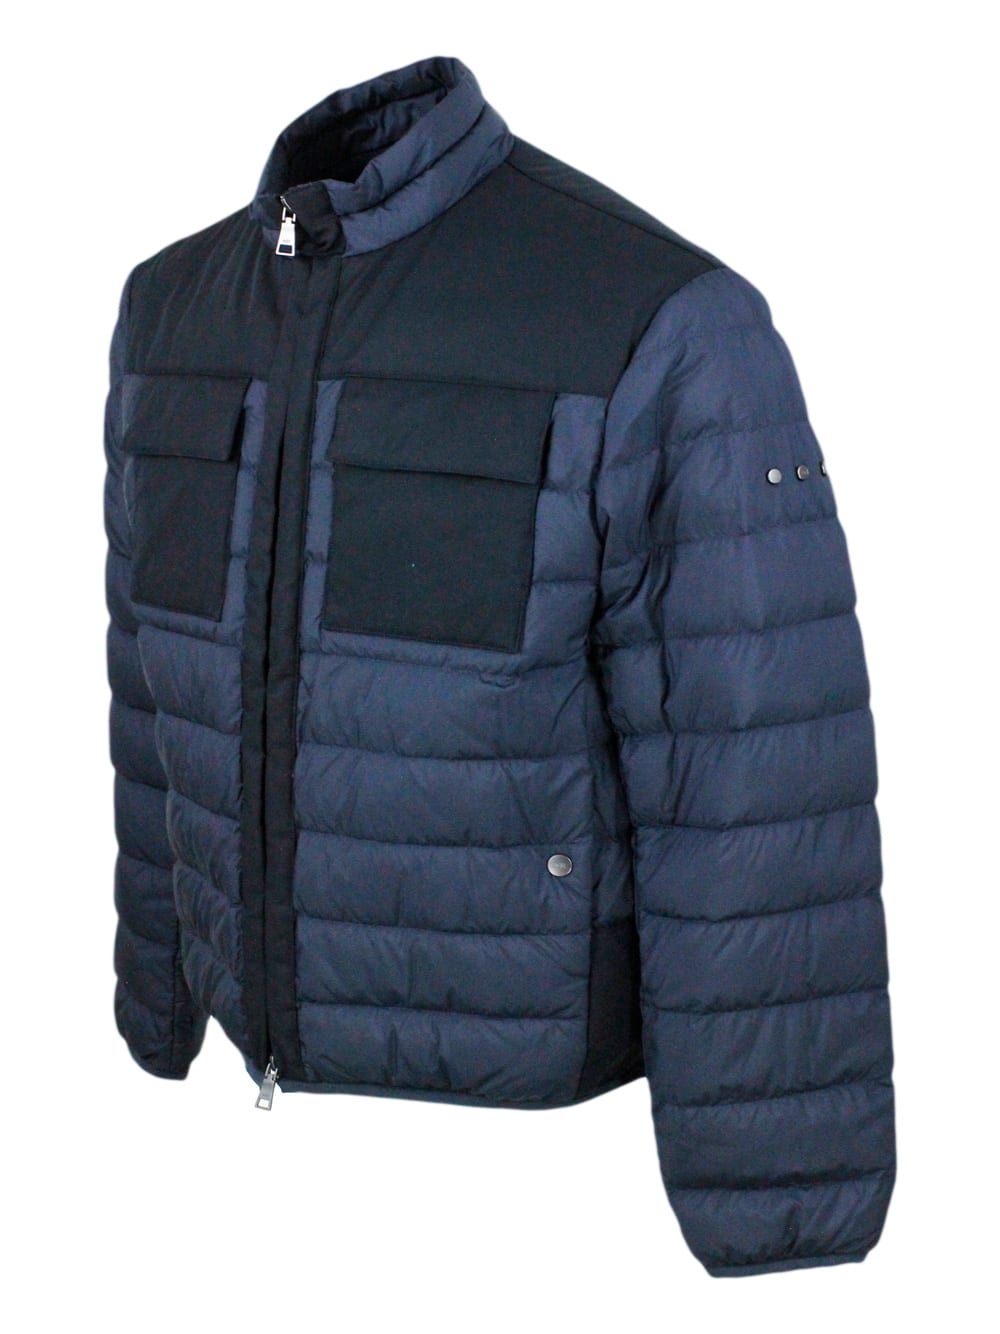 Shop Add 100 Gram Down Jacket With High Quality Feathers. Technical Fabric Details And Chest Pockets. The Clo In Dark Blu